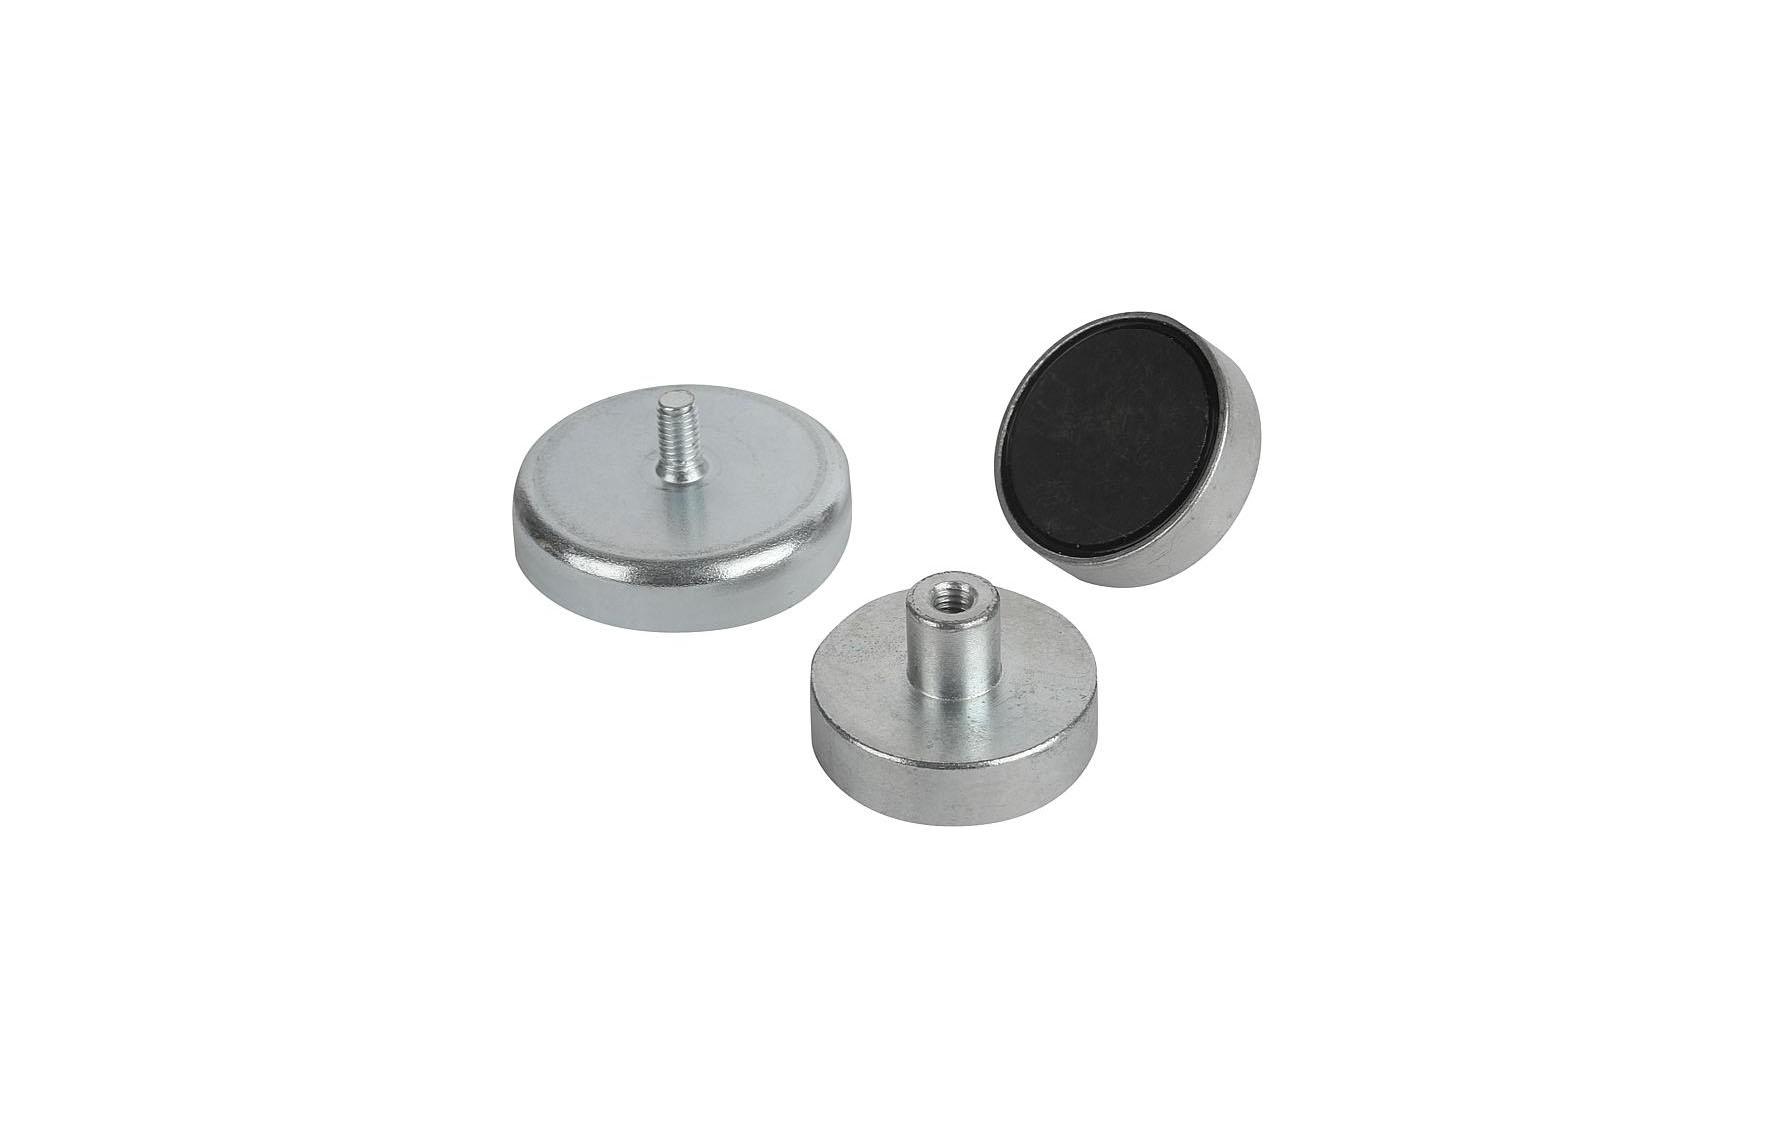 K0549_Magnets shallow pot with thread hard ferrite